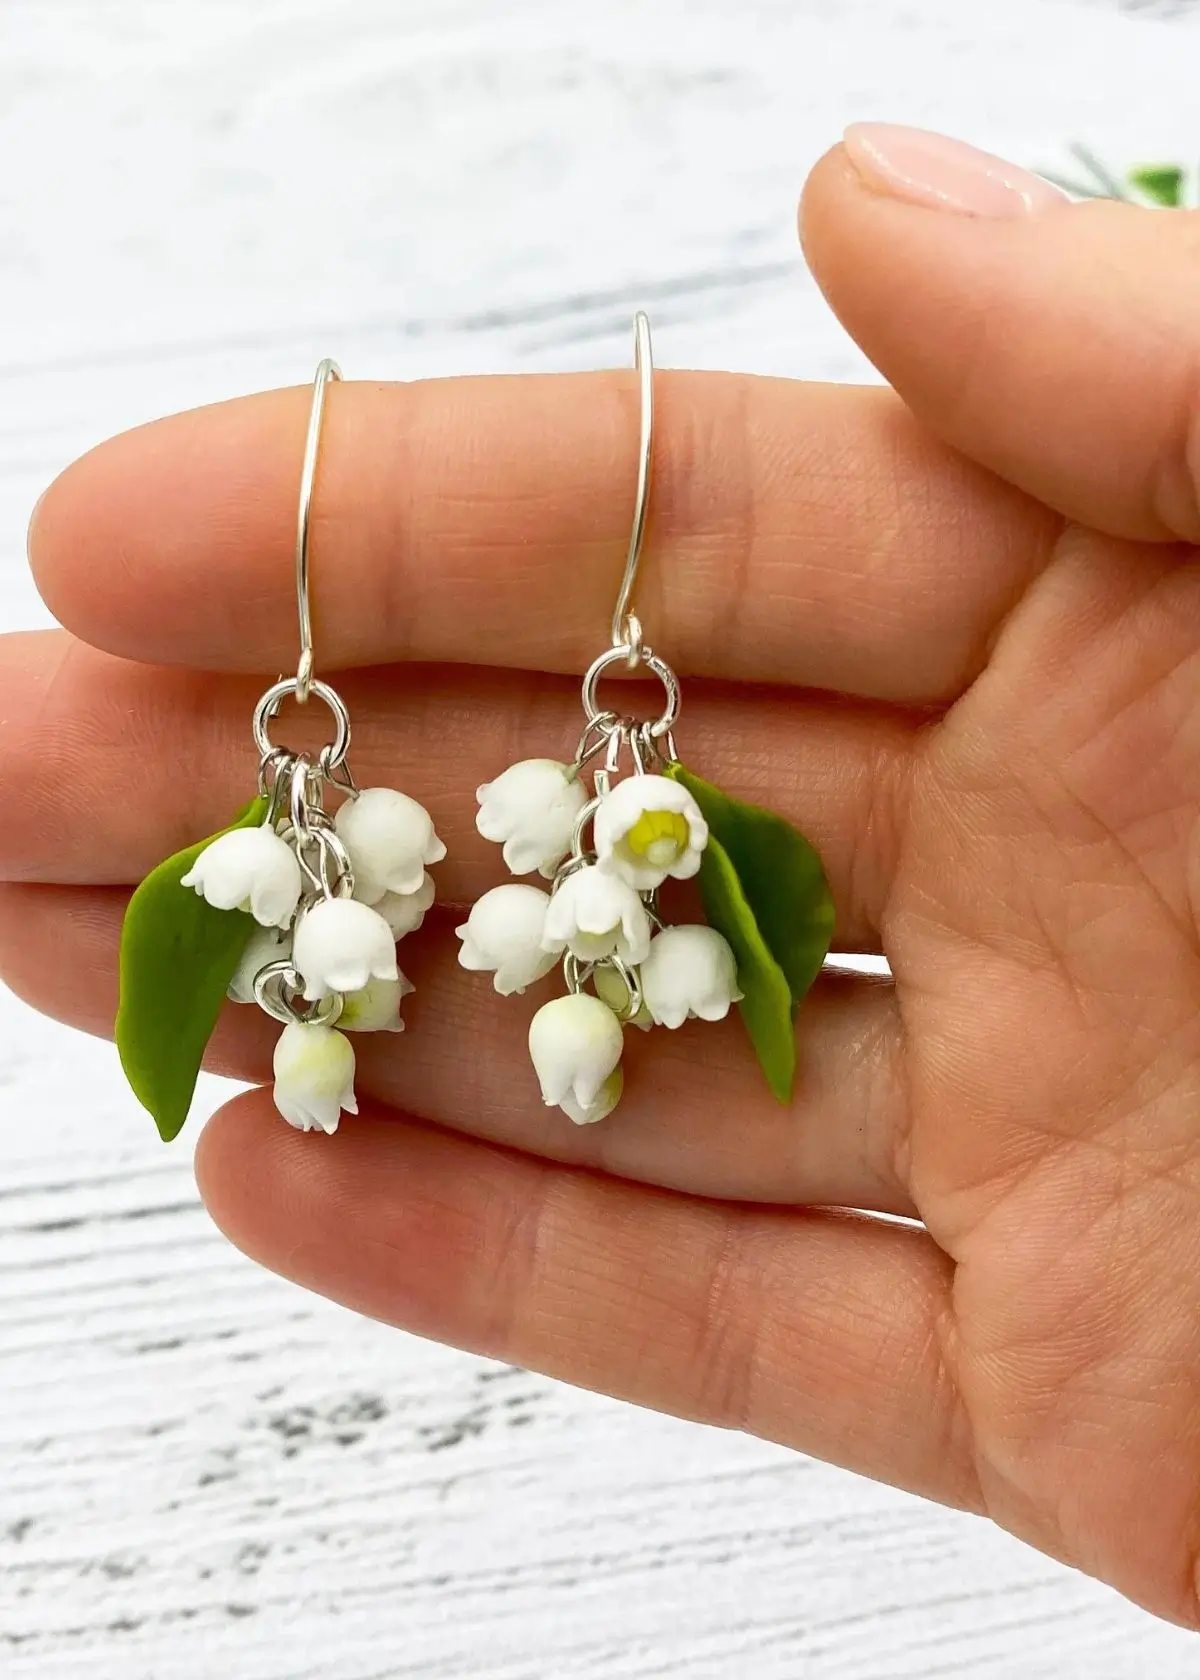 What materials are Lily of the Valley Earrings Made from?